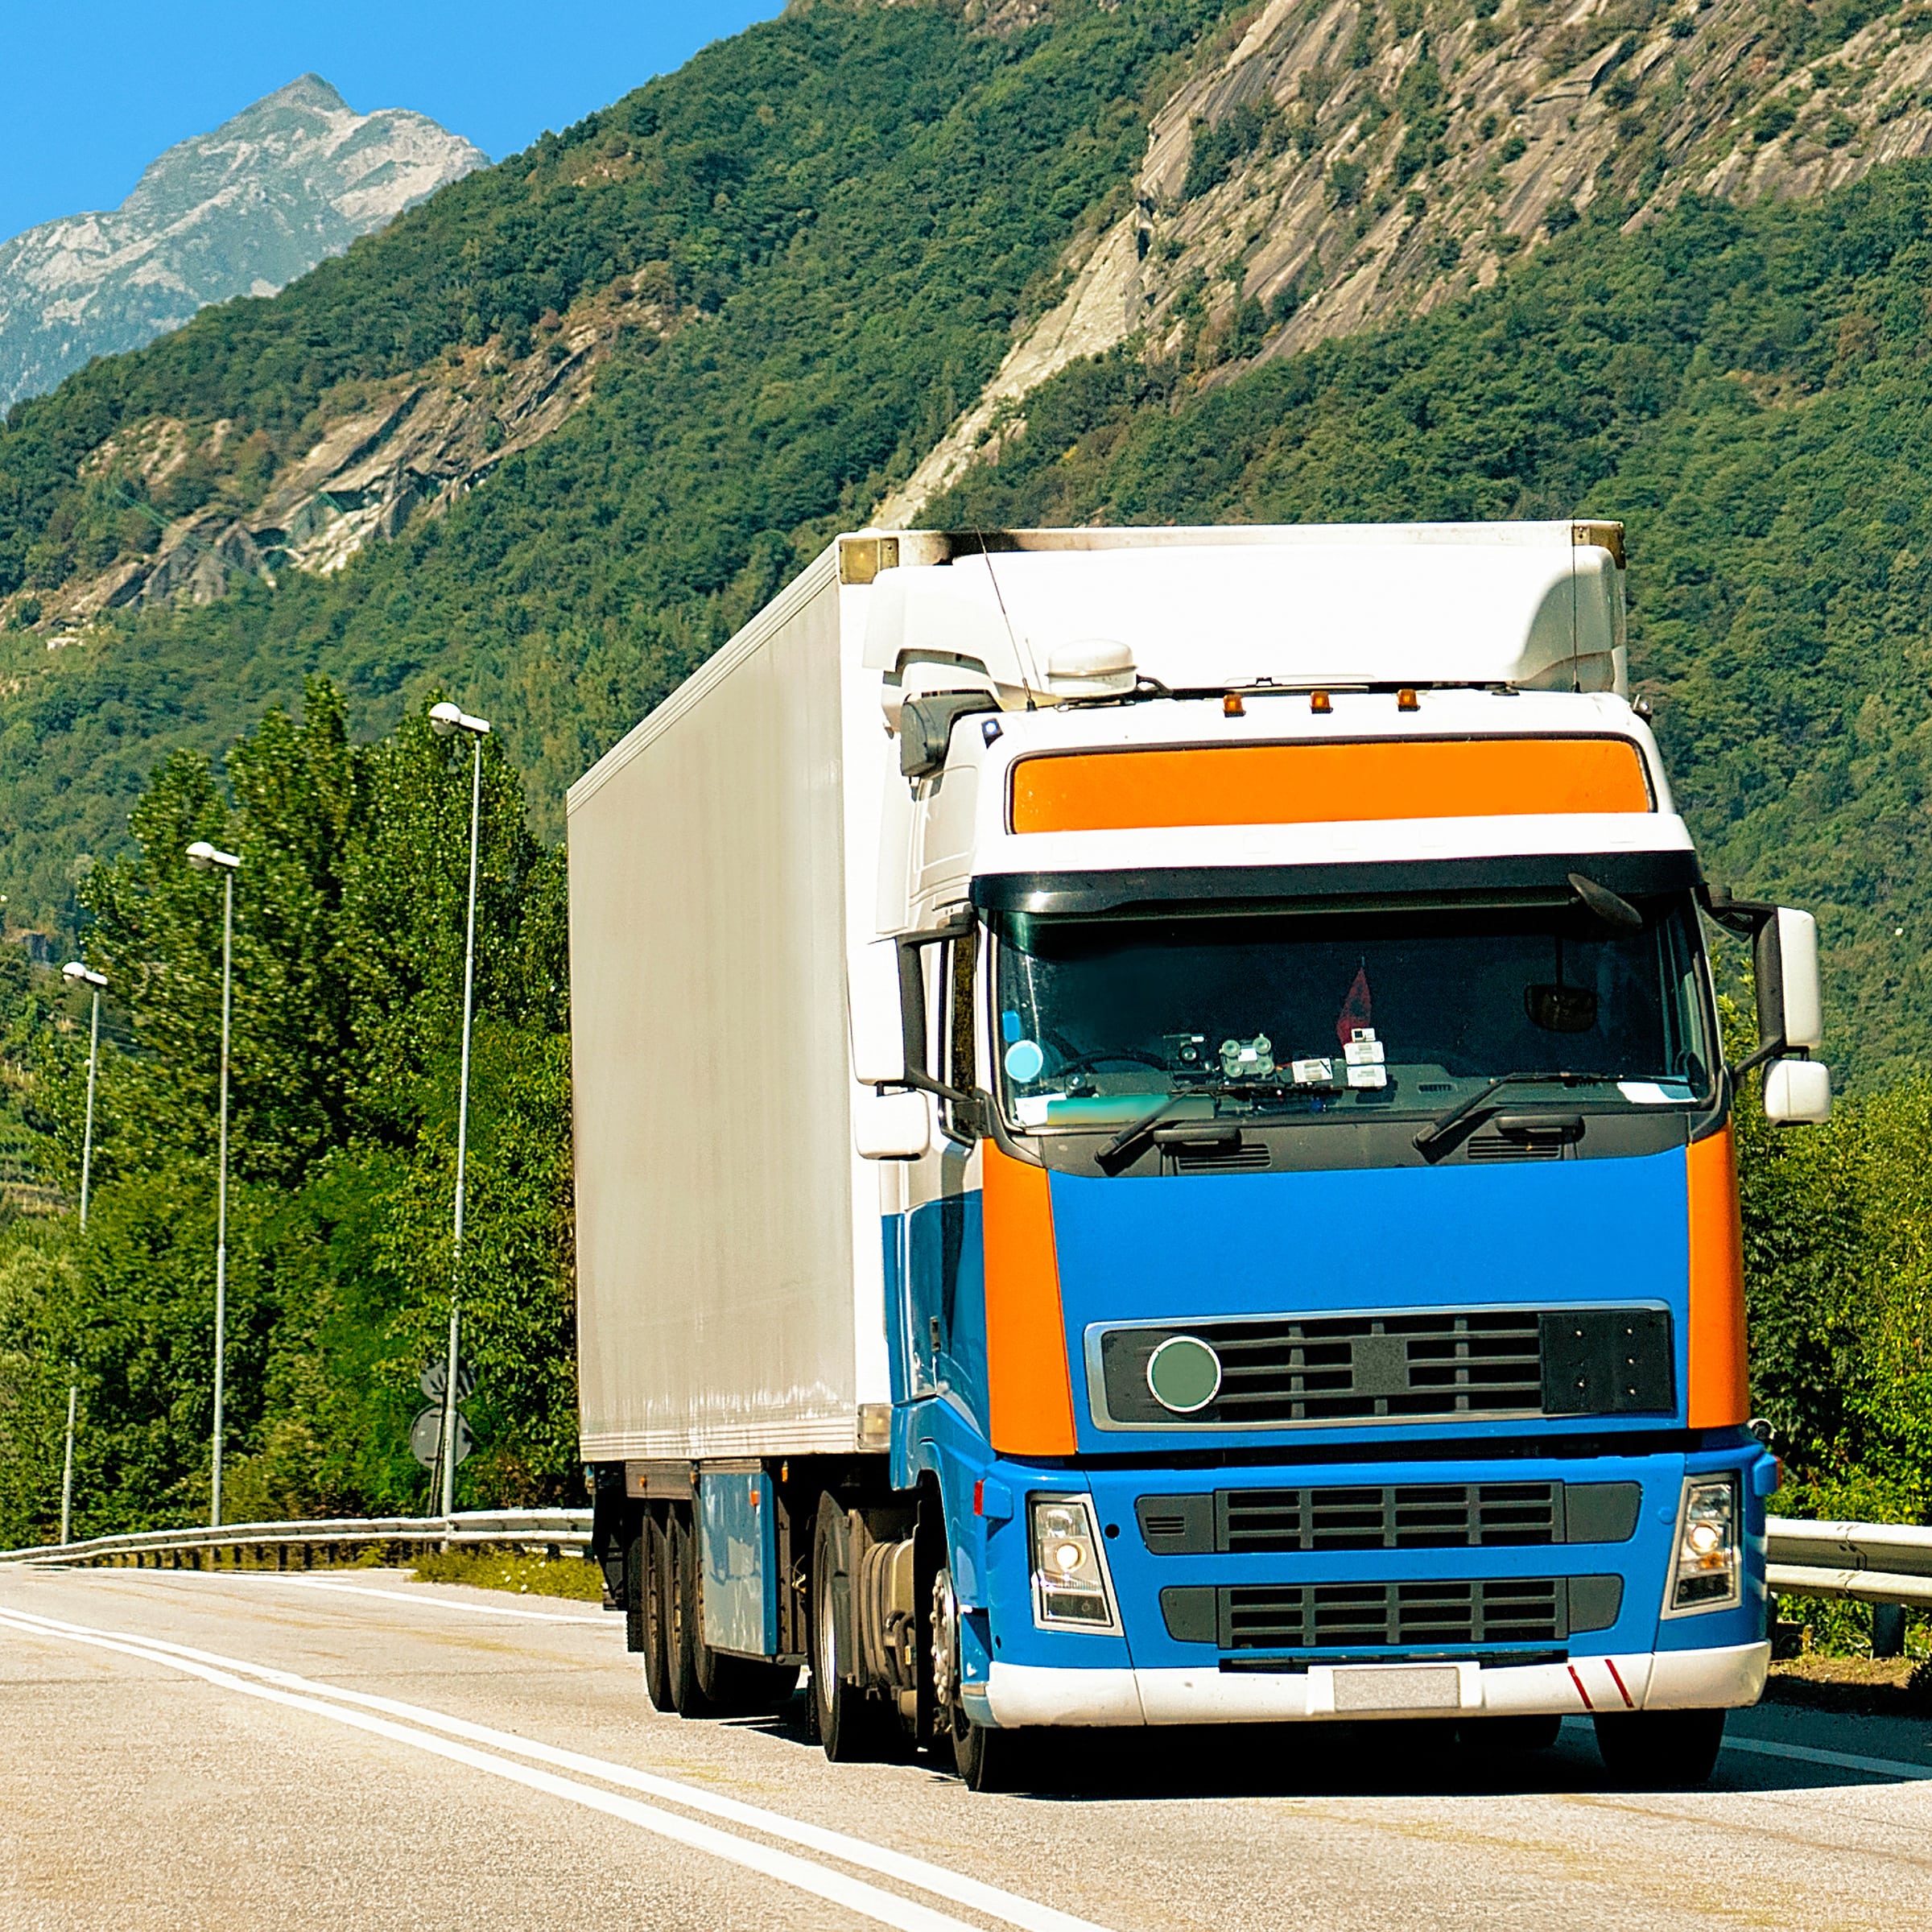 truck-summer-road-switzerland-trucker-highway-lorry-doing-logistics-work-semi-trailer-with-driver-big-cargo-car-drive-freight-delivery-transport-export-industry-container-with-goods (1)-min